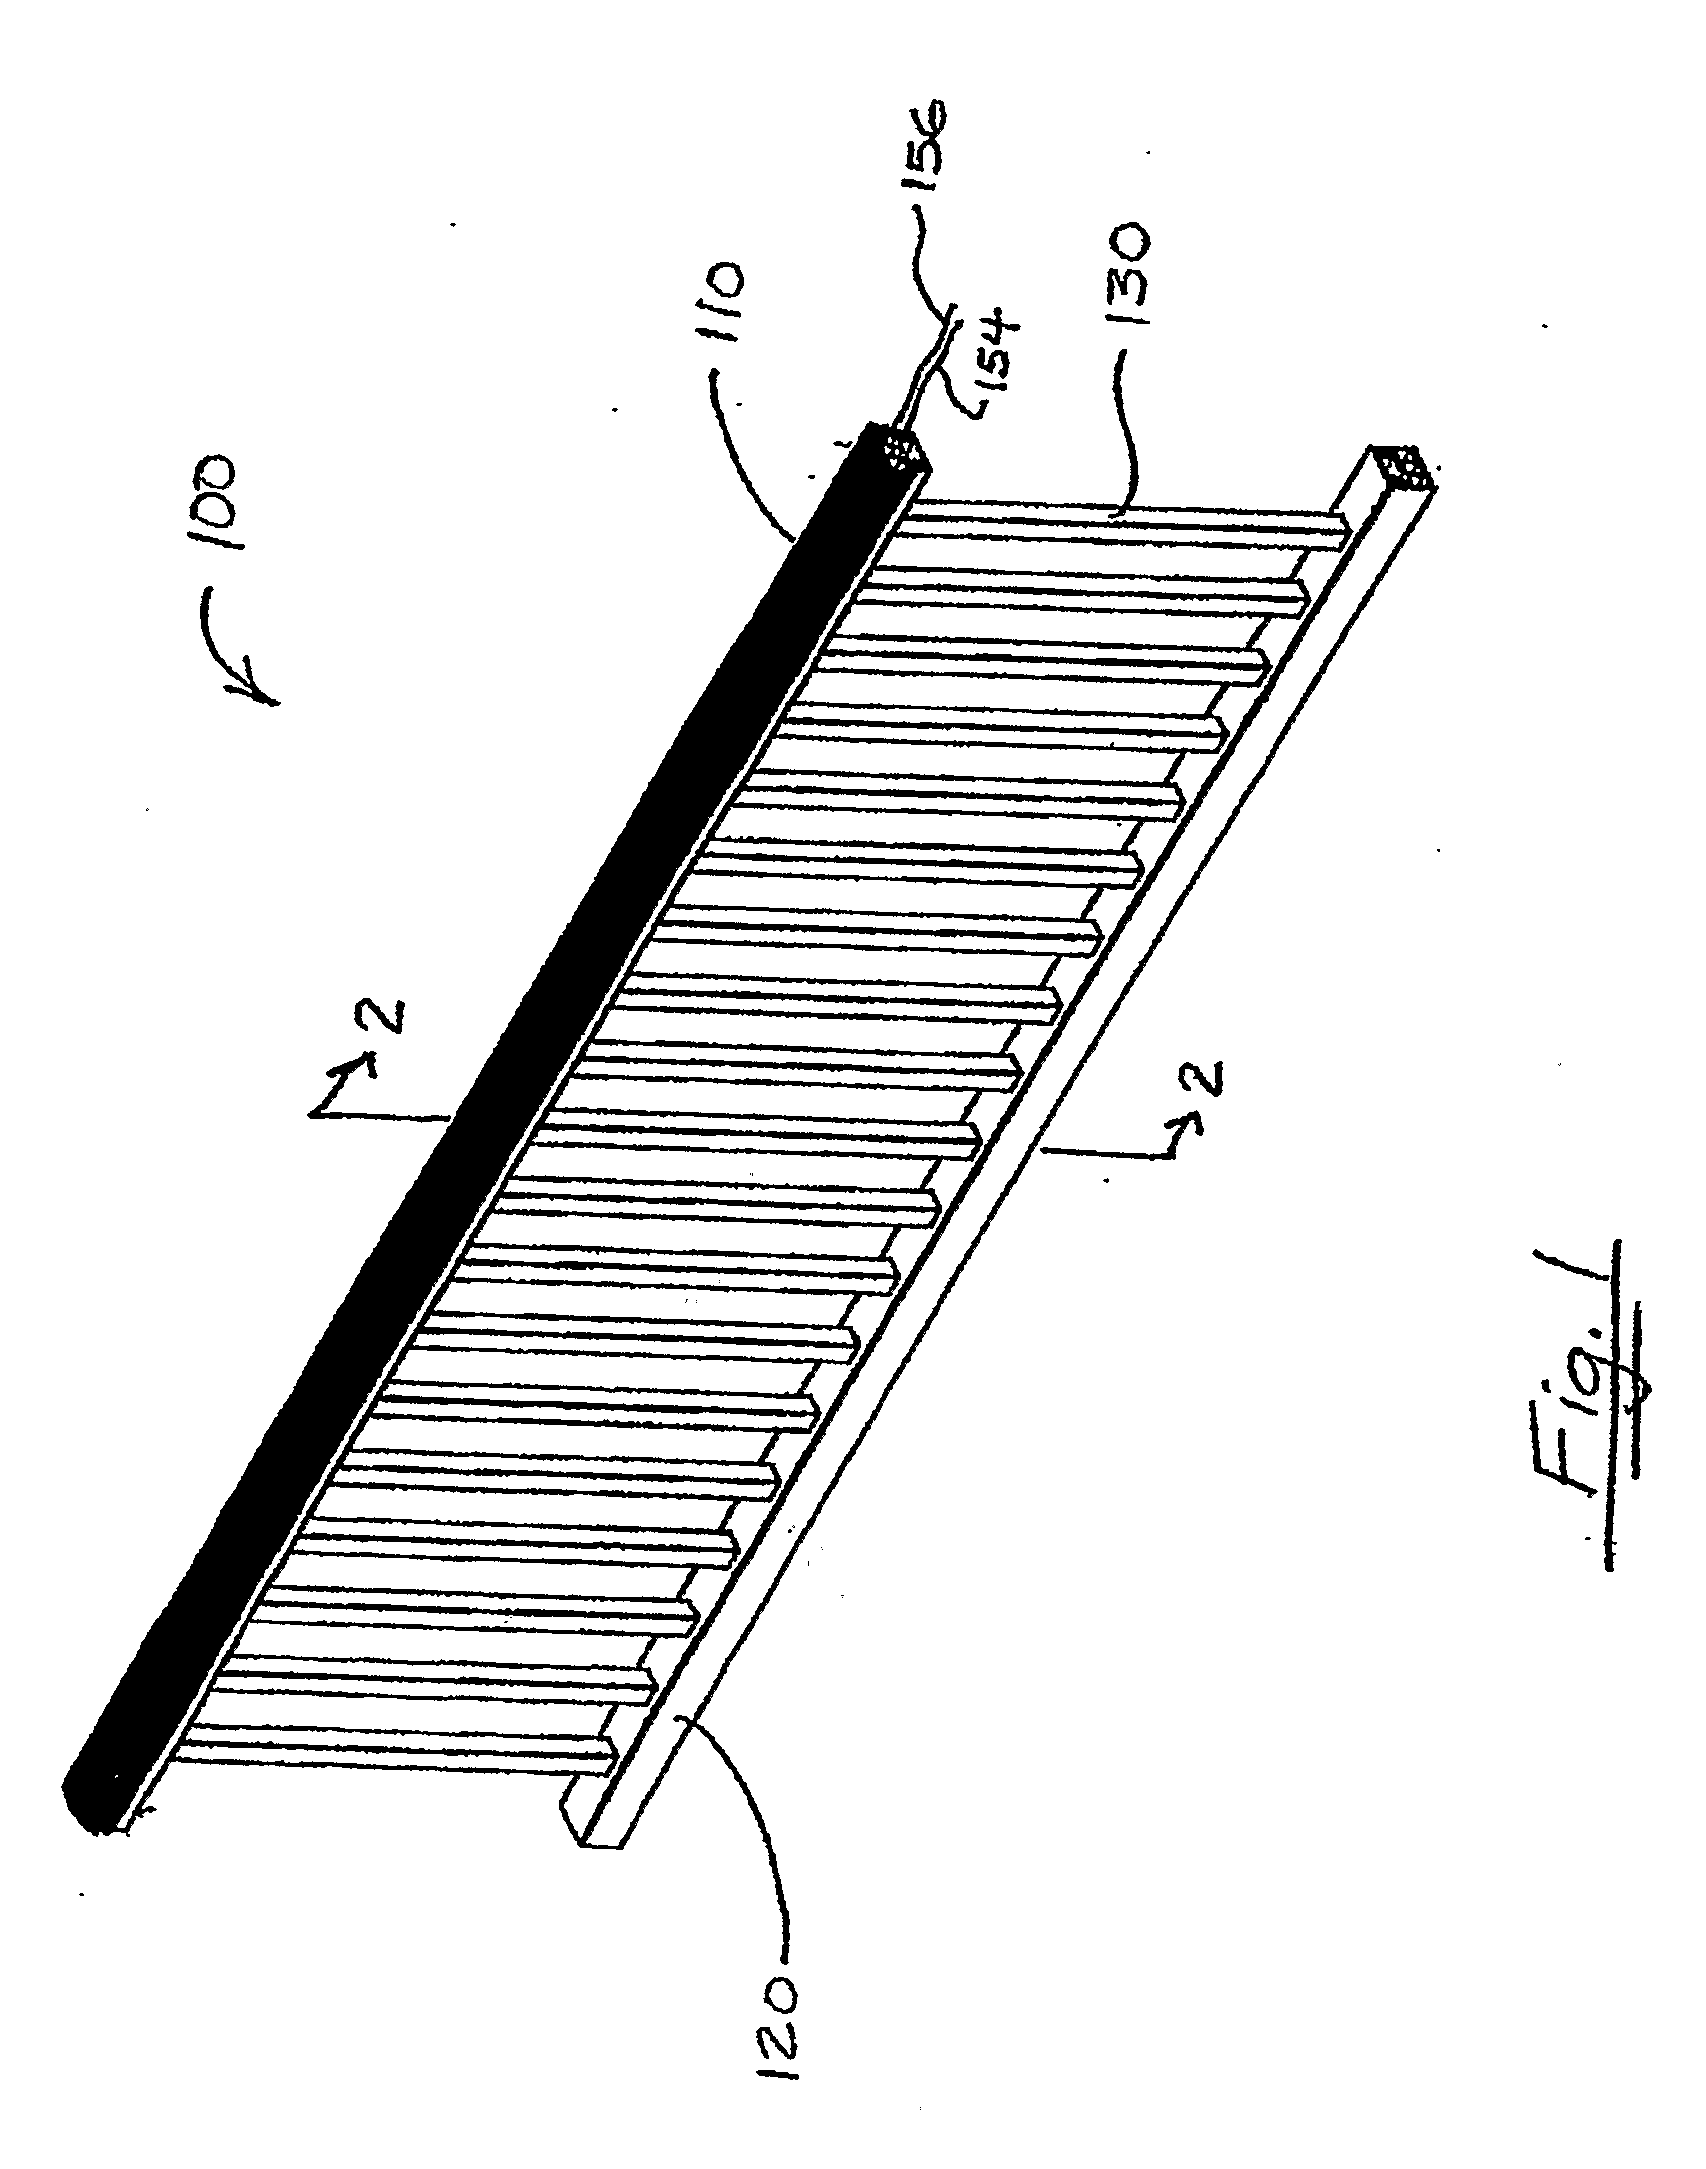 Railing Assembly with Detachable and Upgradeable Components